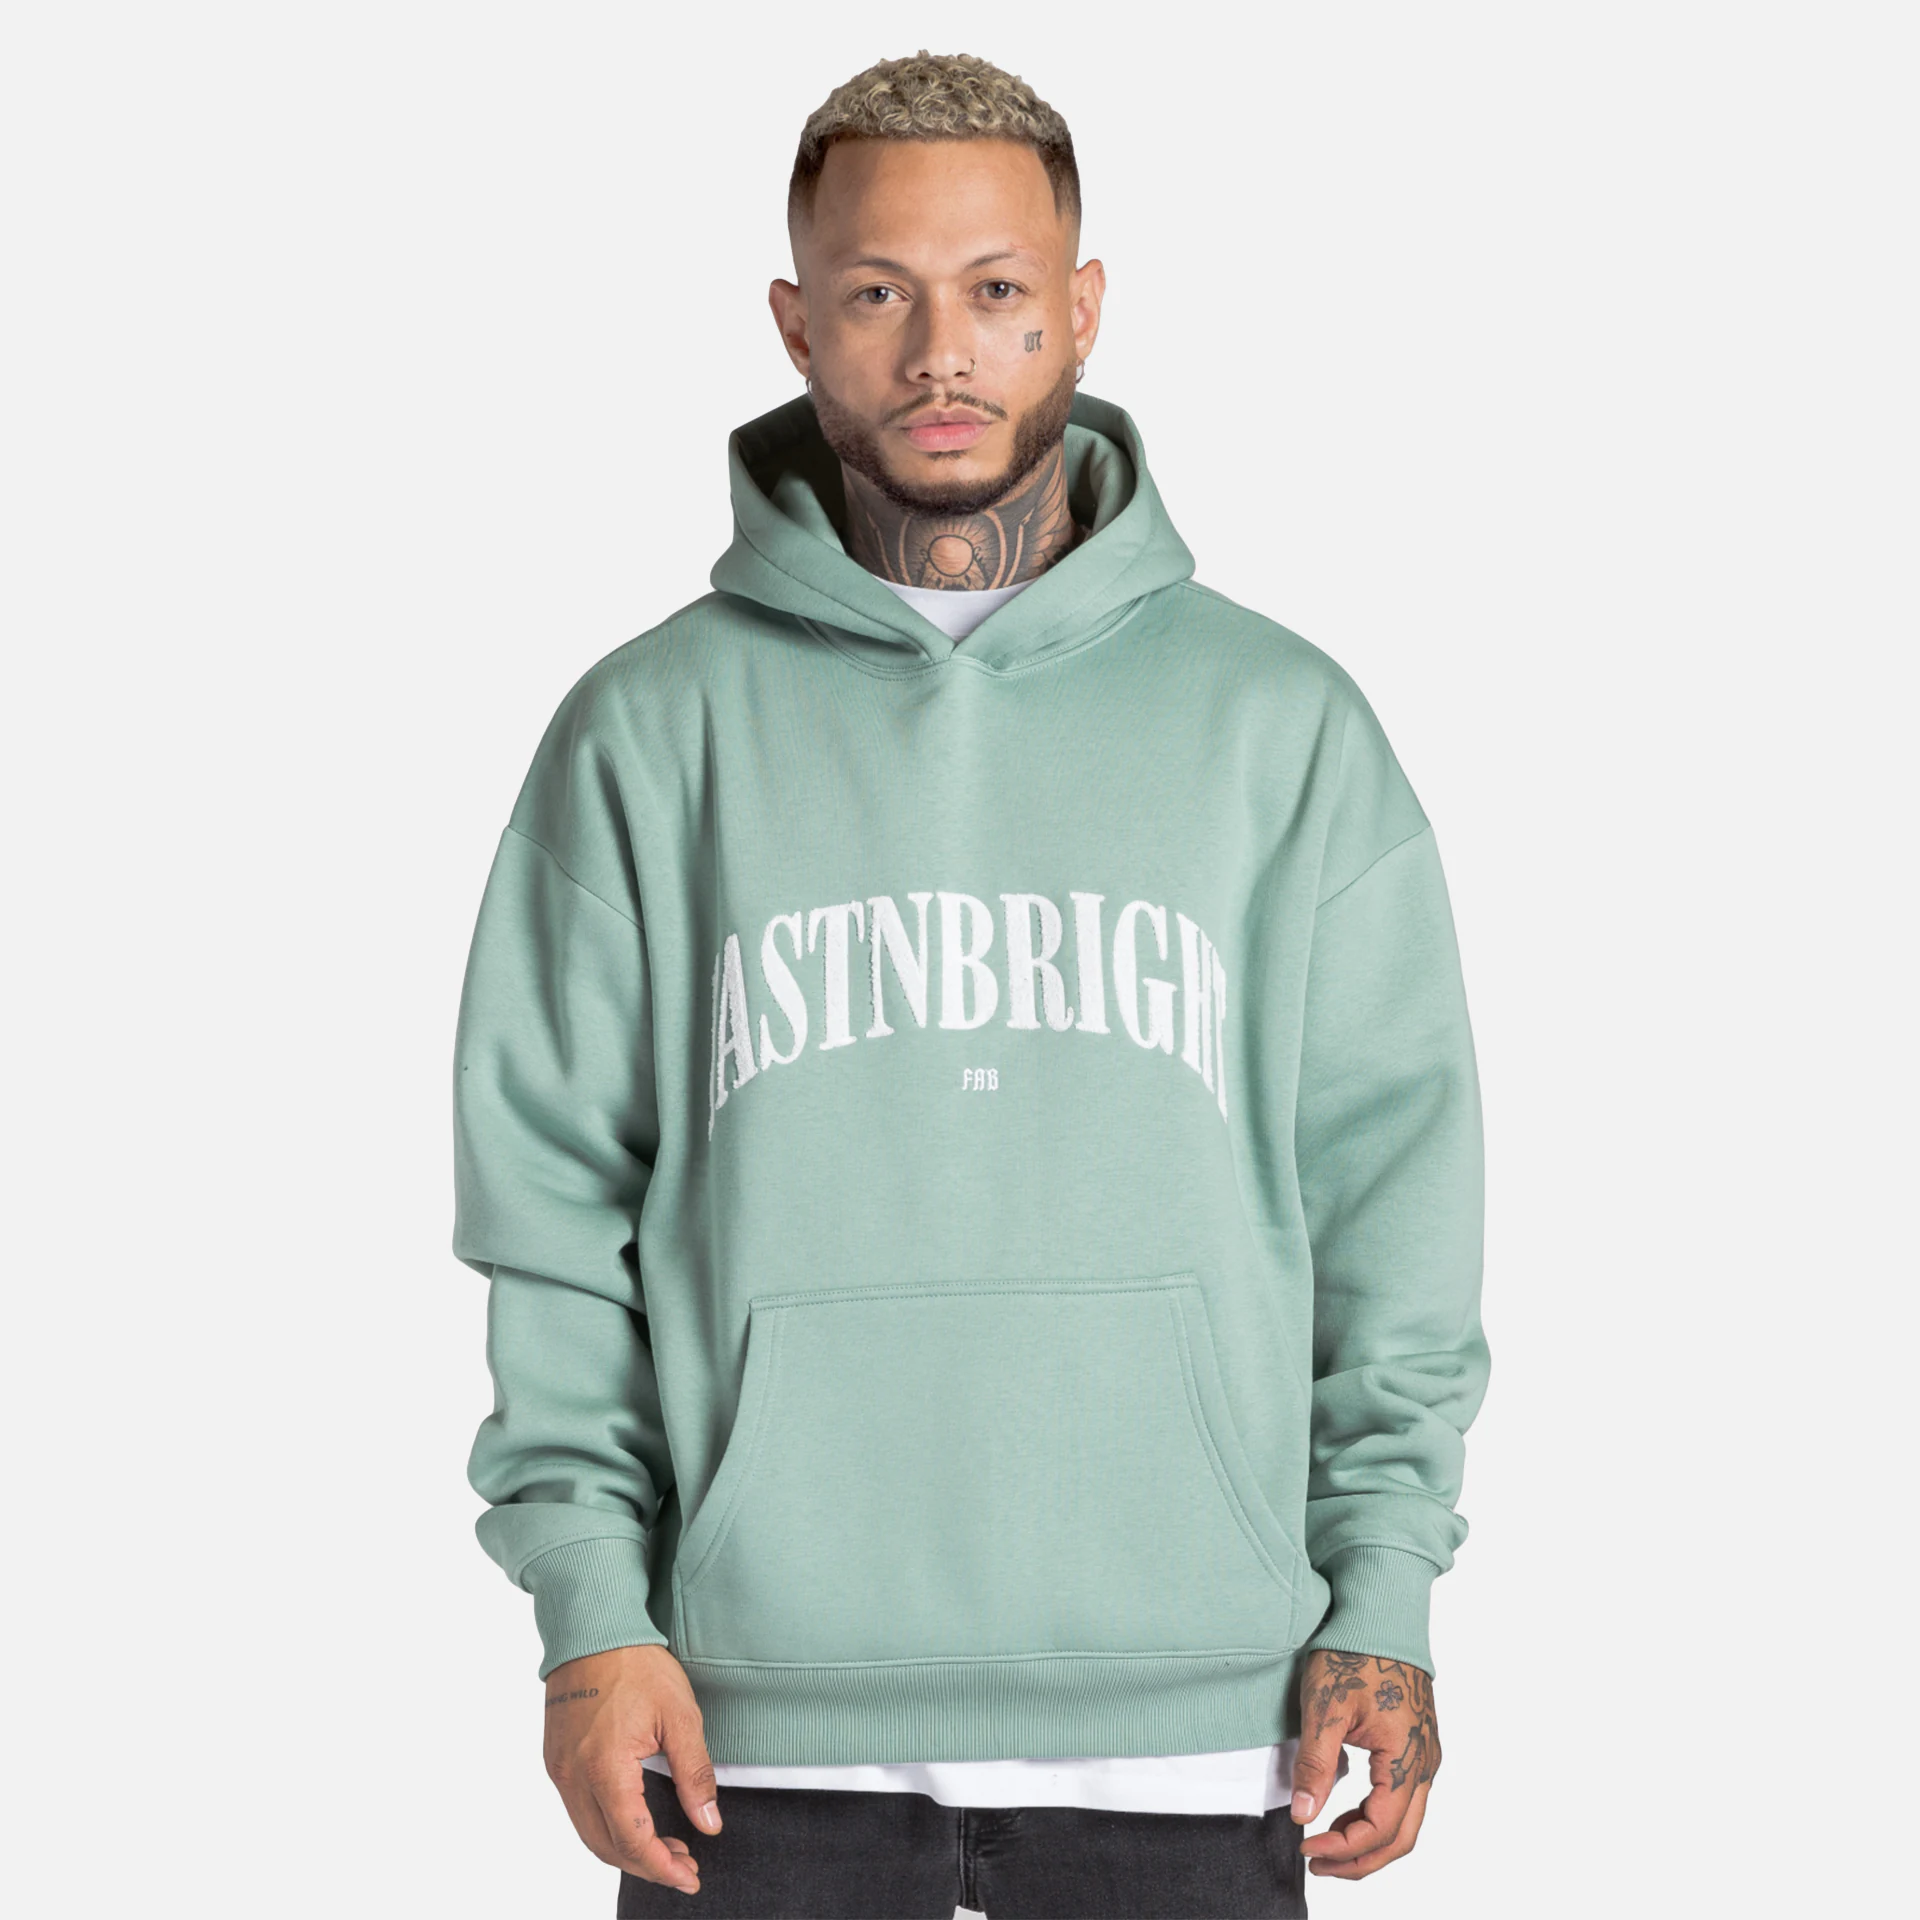 Fast and Bright FAB Hoodie Mint